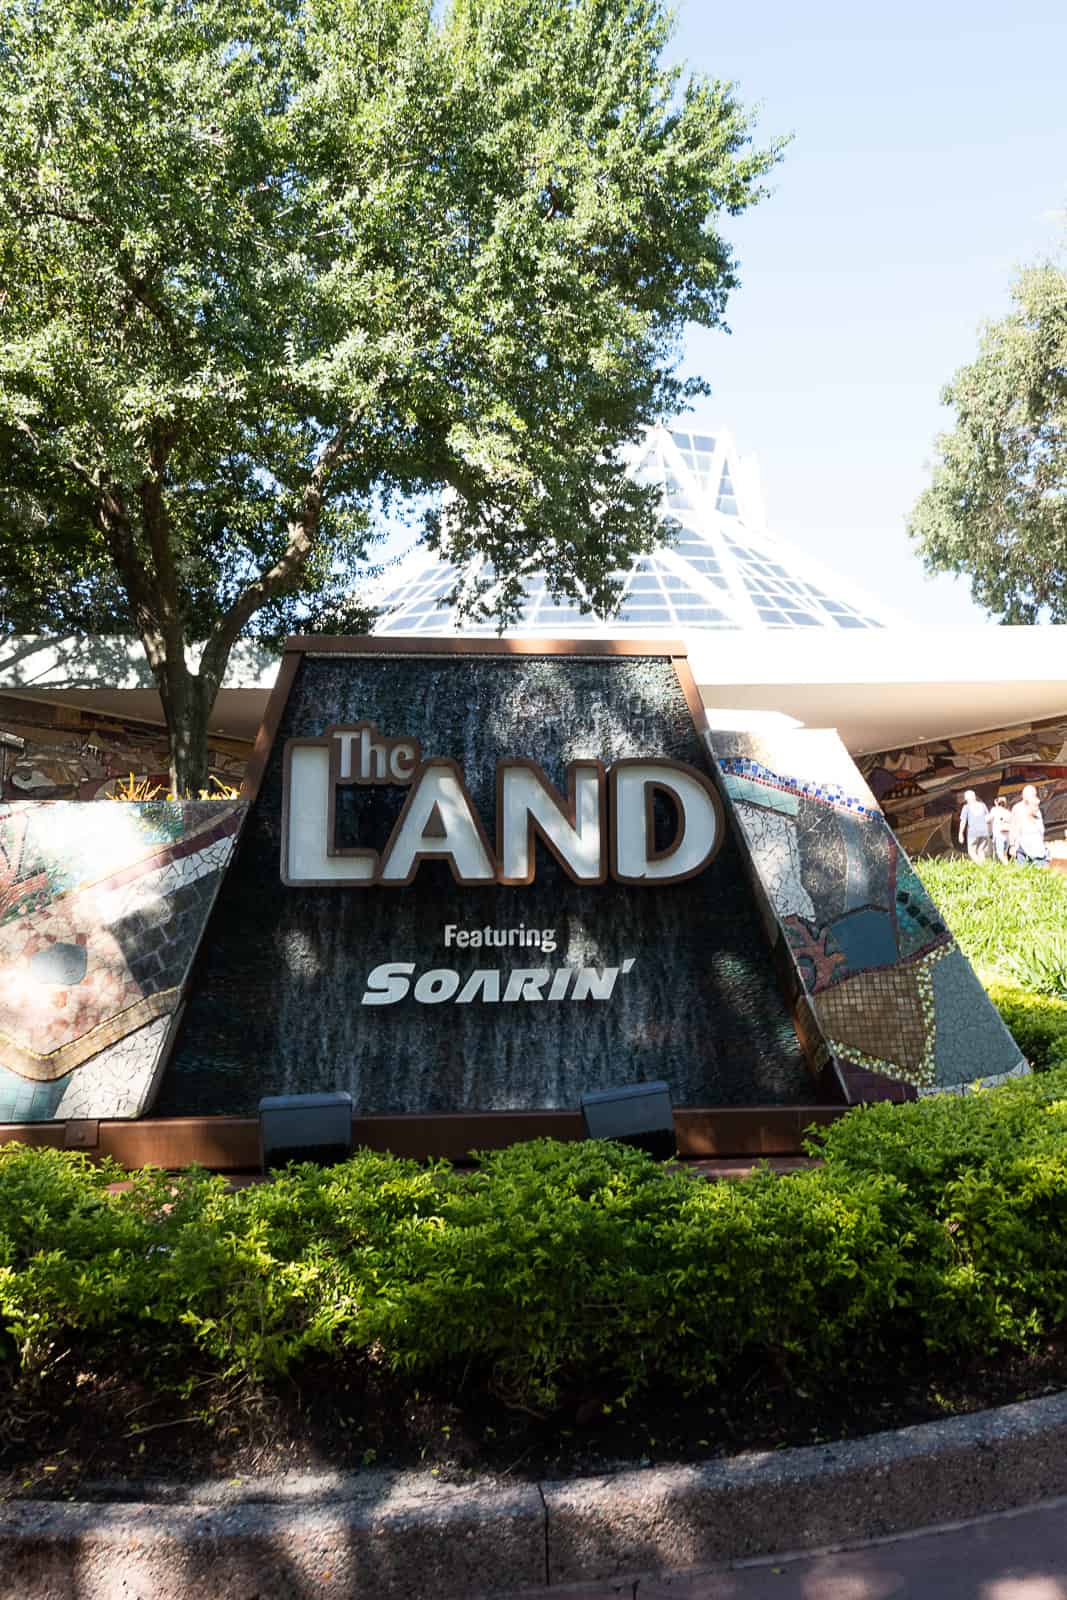 The Land Epcot Park Sign featuring Soarin ride